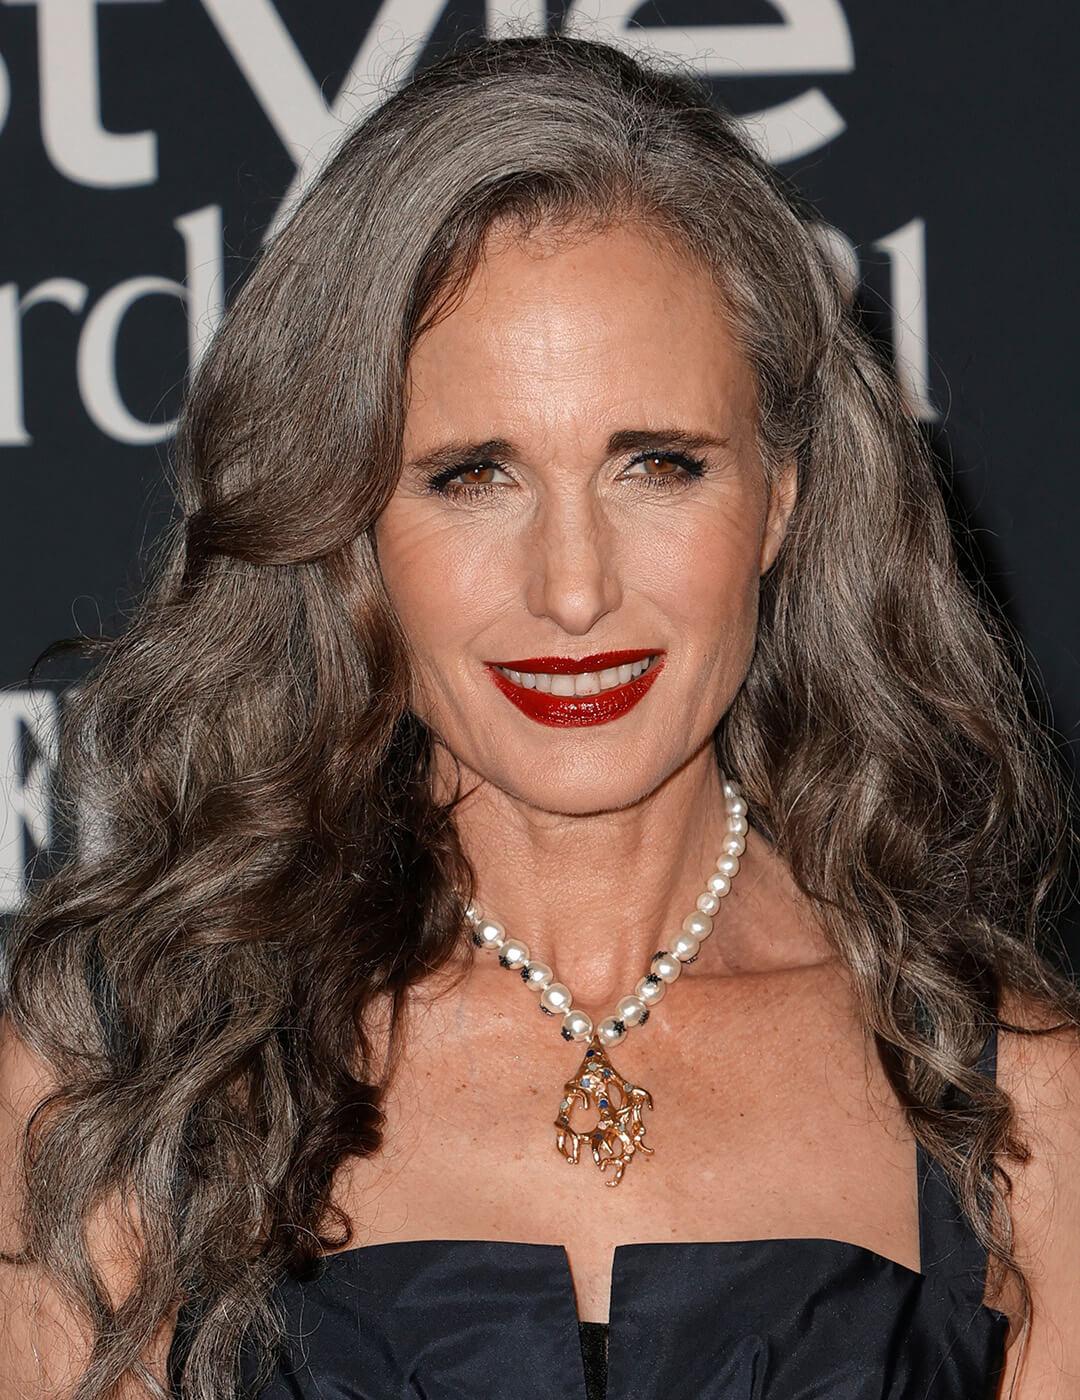 A photo of Andie MacDowell with a smokey eye makeup and red lip look wearing a black dress and a pearl necklace